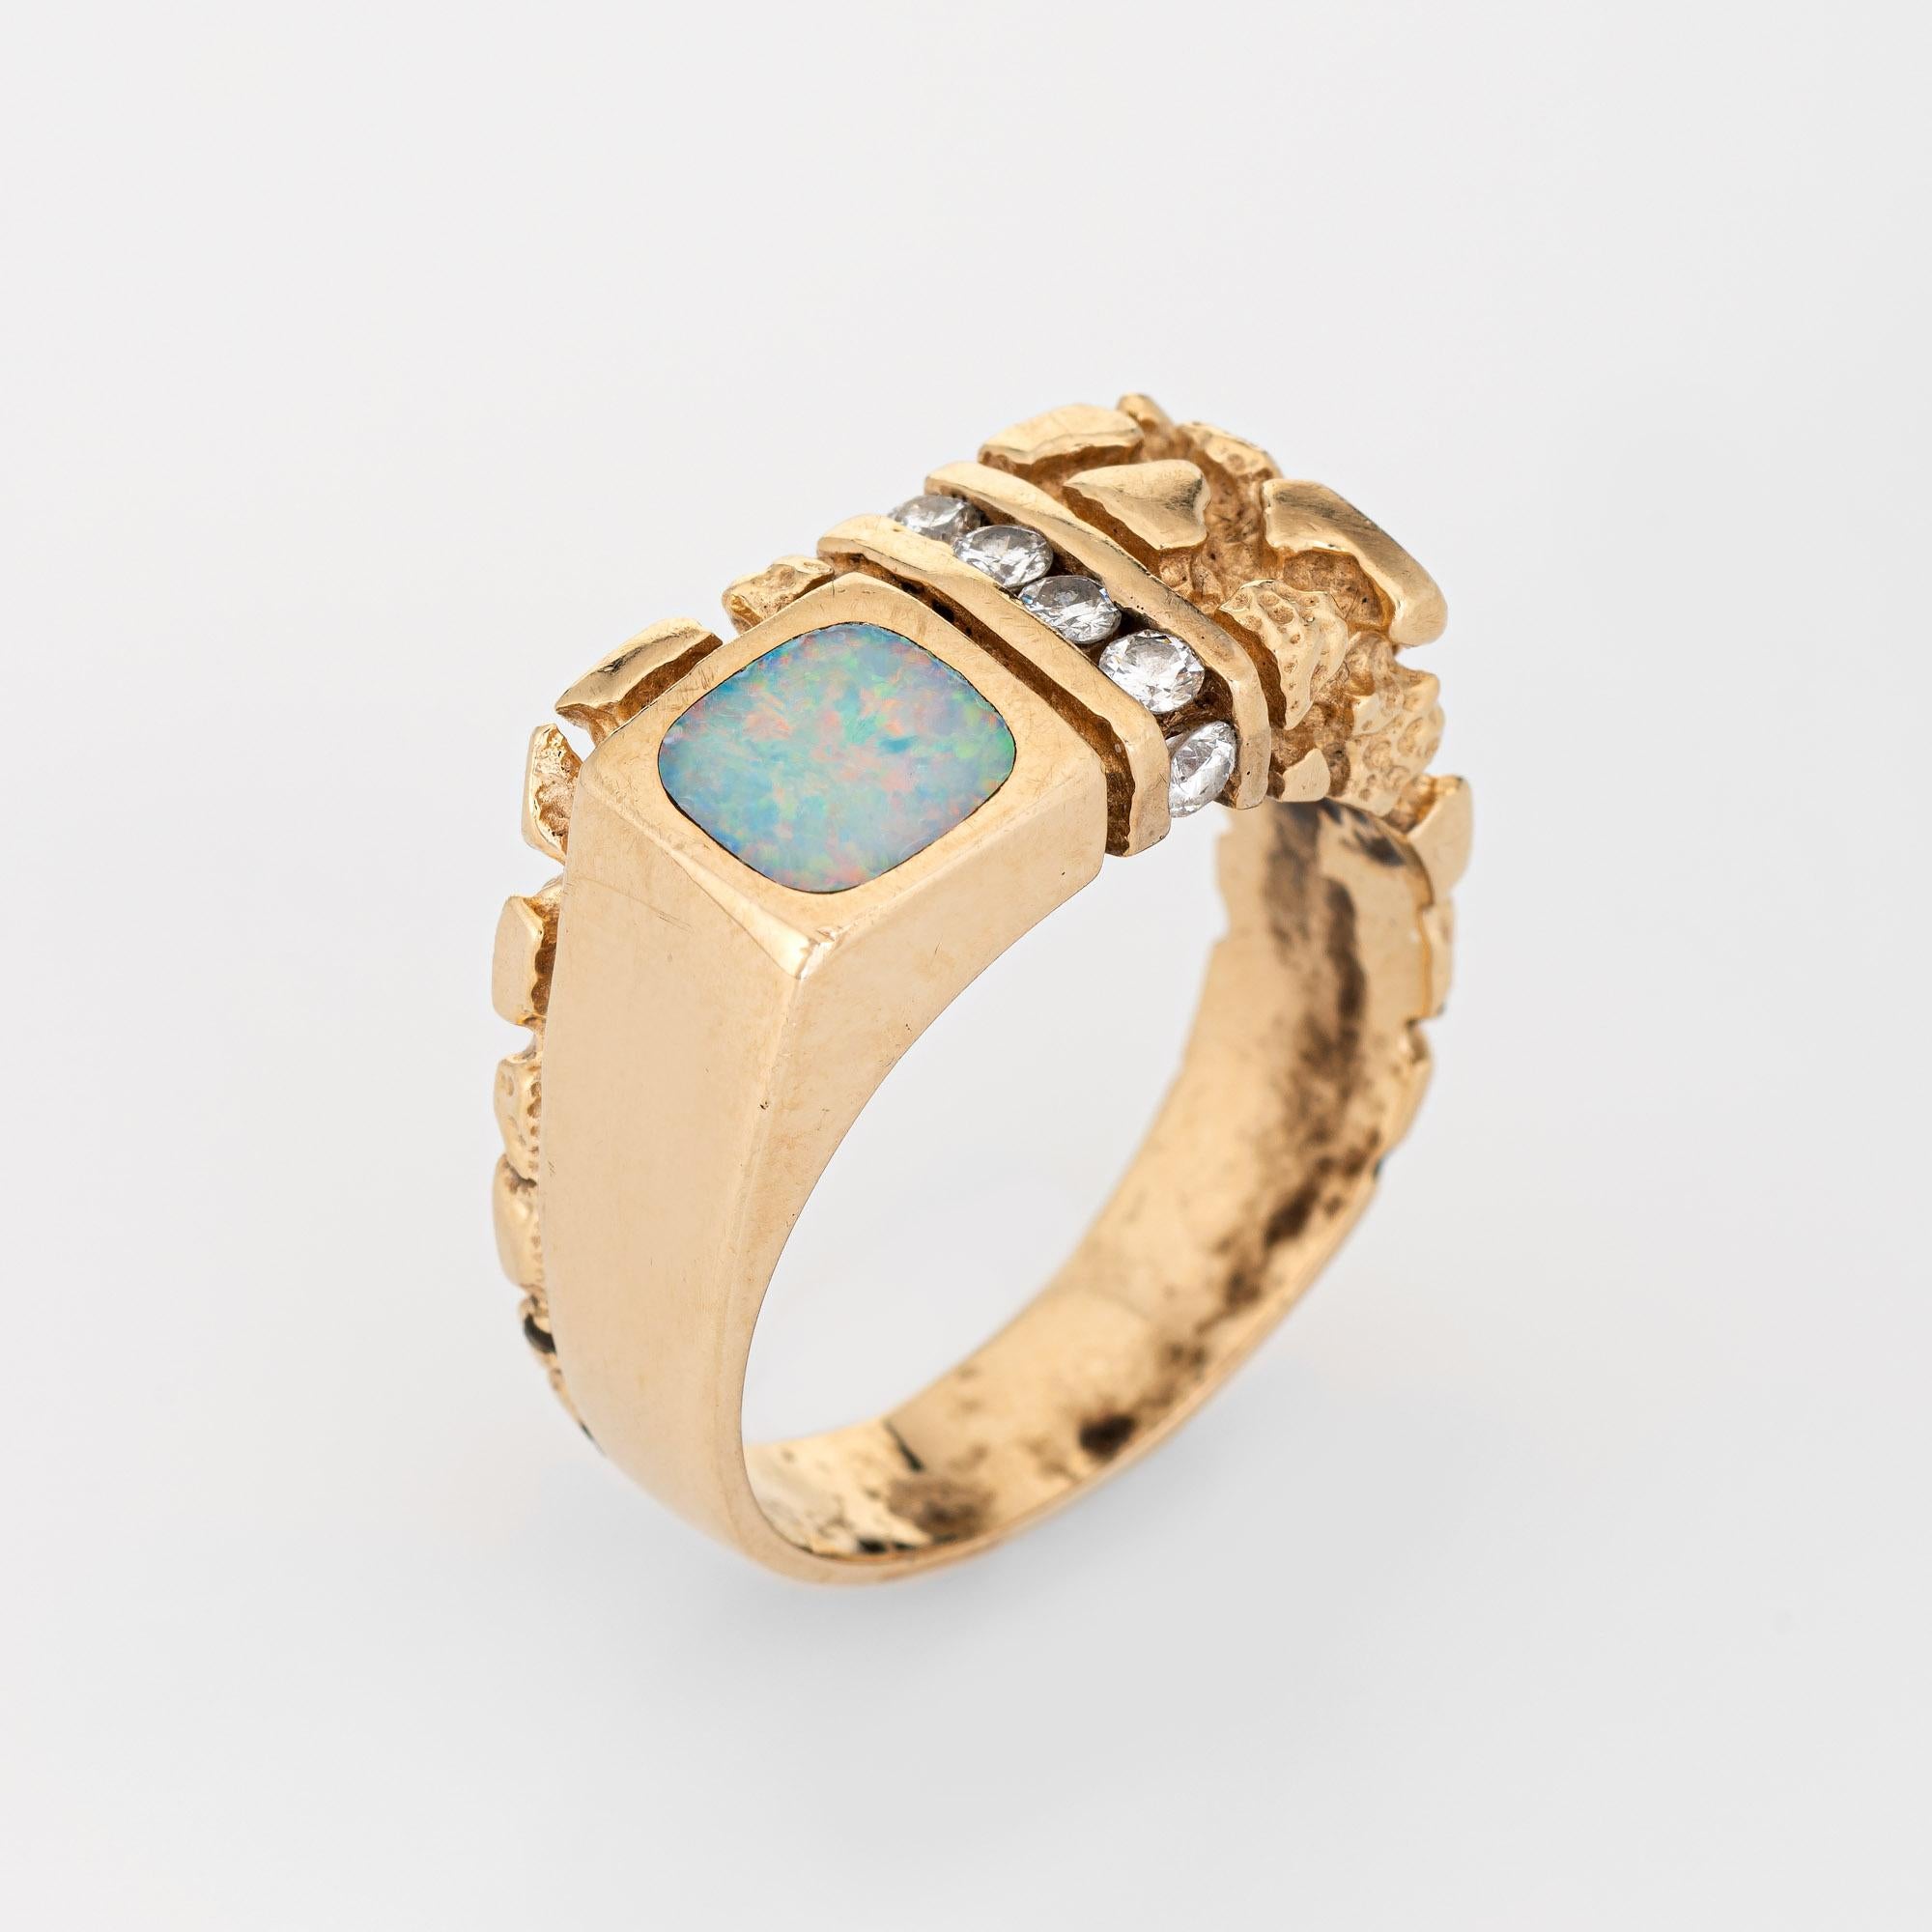 Stylish vintage opal & diamond nugget ring (circa 1970s) crafted in 14 karat yellow gold. 

Inlaid opal measures 7mm x 7mm, accented with six round brilliant cut diamonds totaling an estimated 0.30 carats (estimated at H-I color and SI1-I1 clarity).